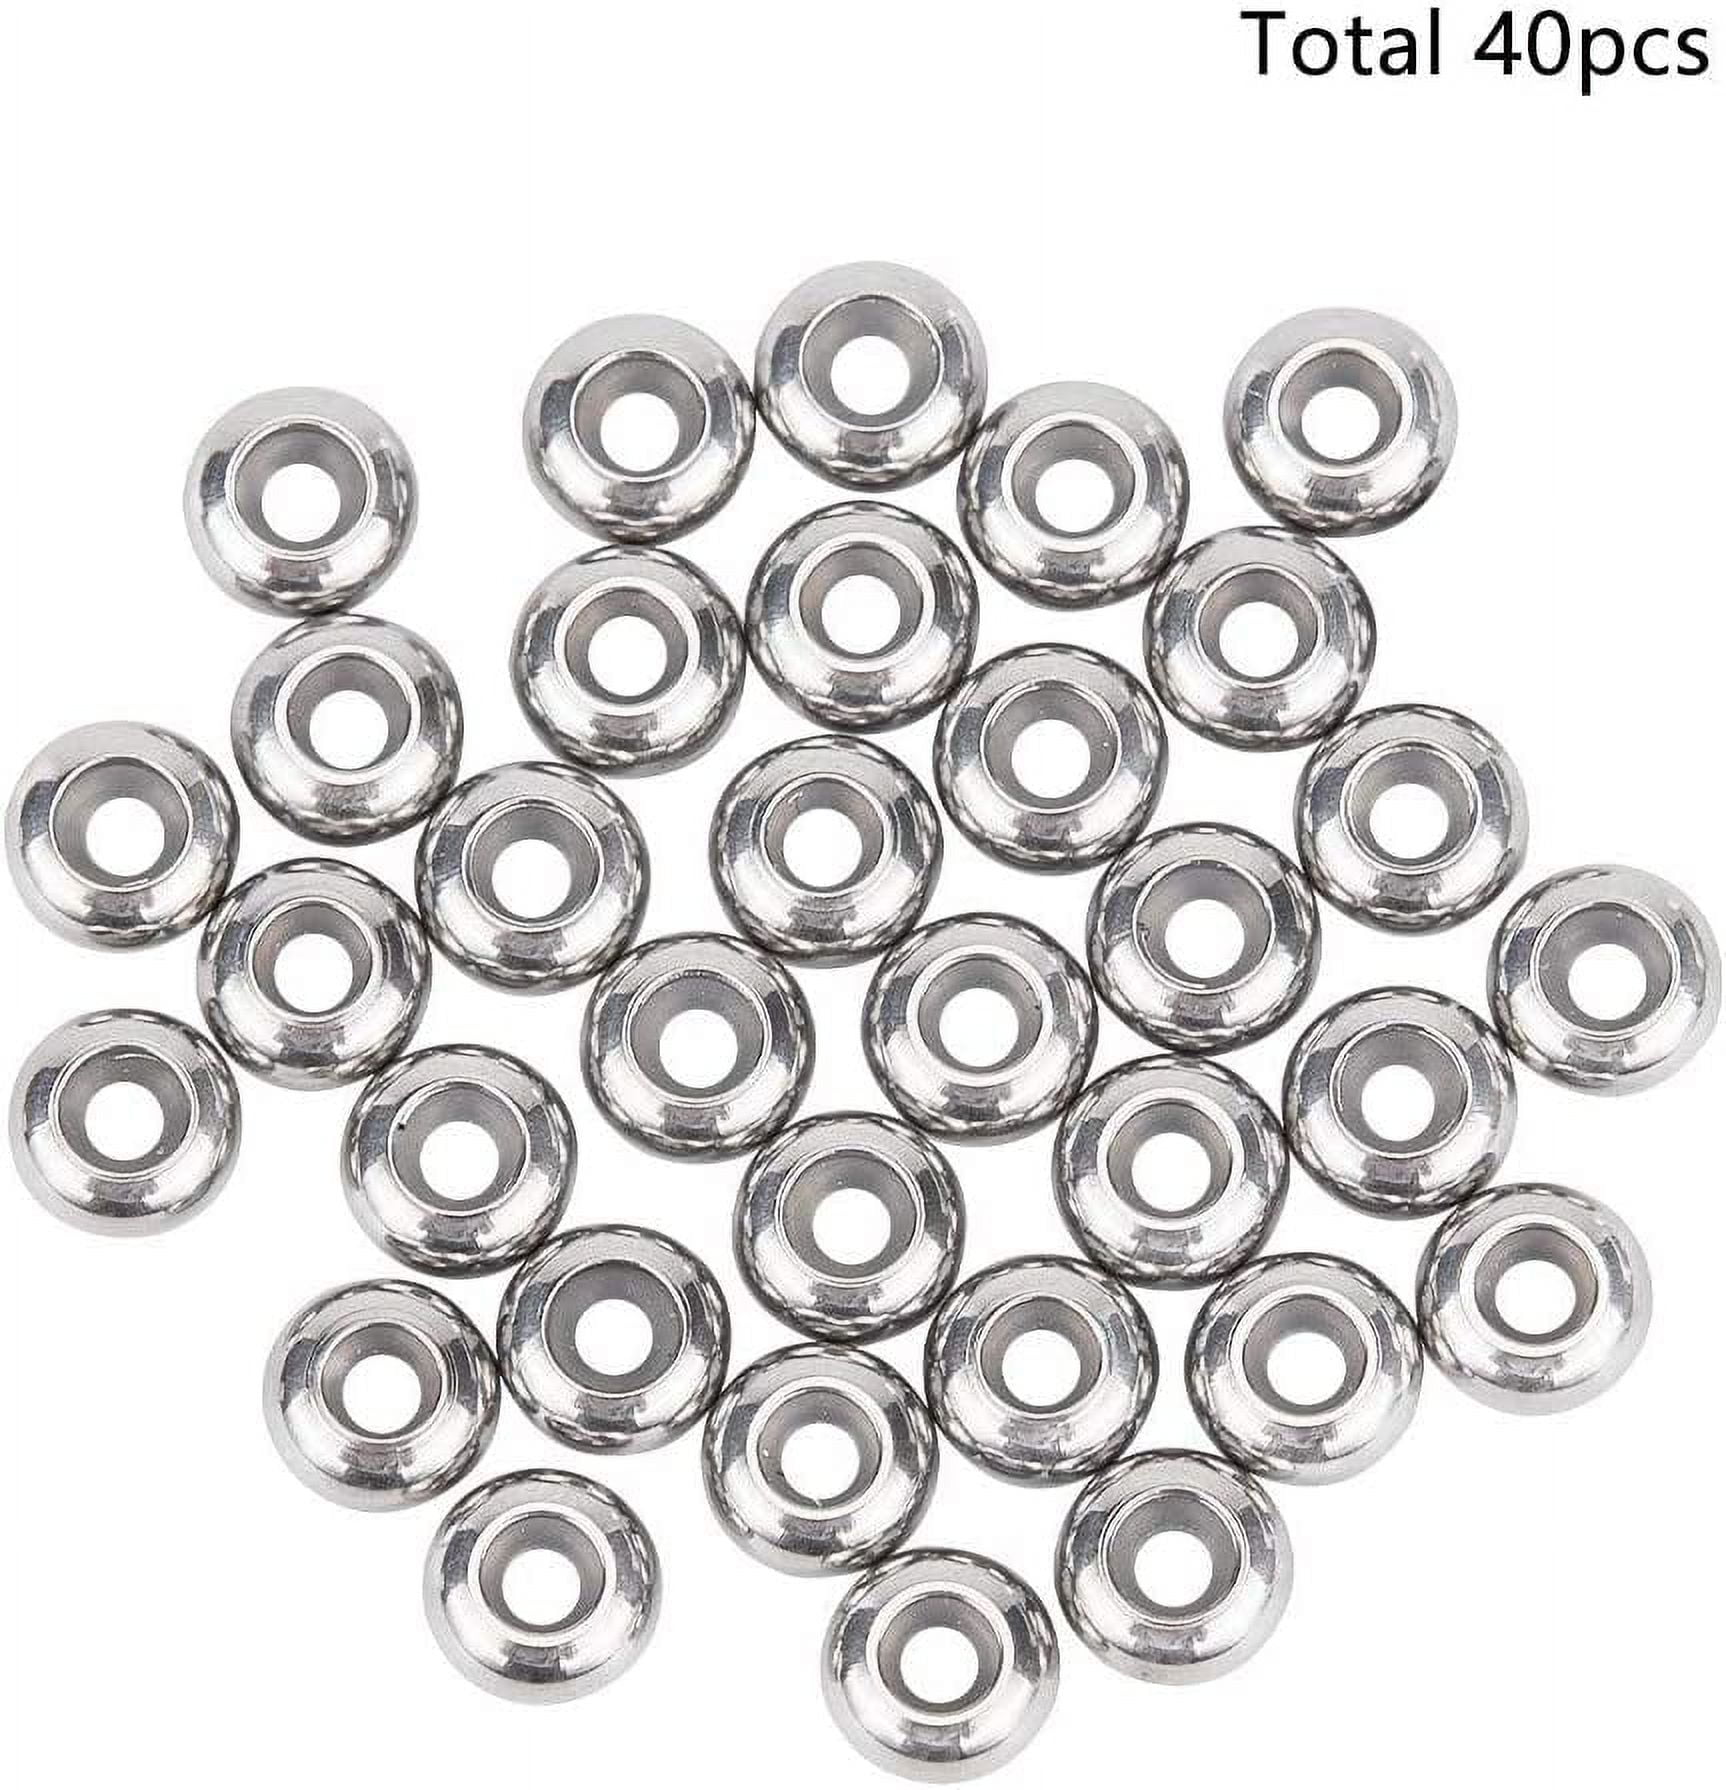 SUNNYCLUE 1 Box 150Pcs Beads Stopper Bead Stoppers Mini Spring Clamps Bead  Bug Jewelry End Clasps Metal Beading Stoppers for Jewelry Making